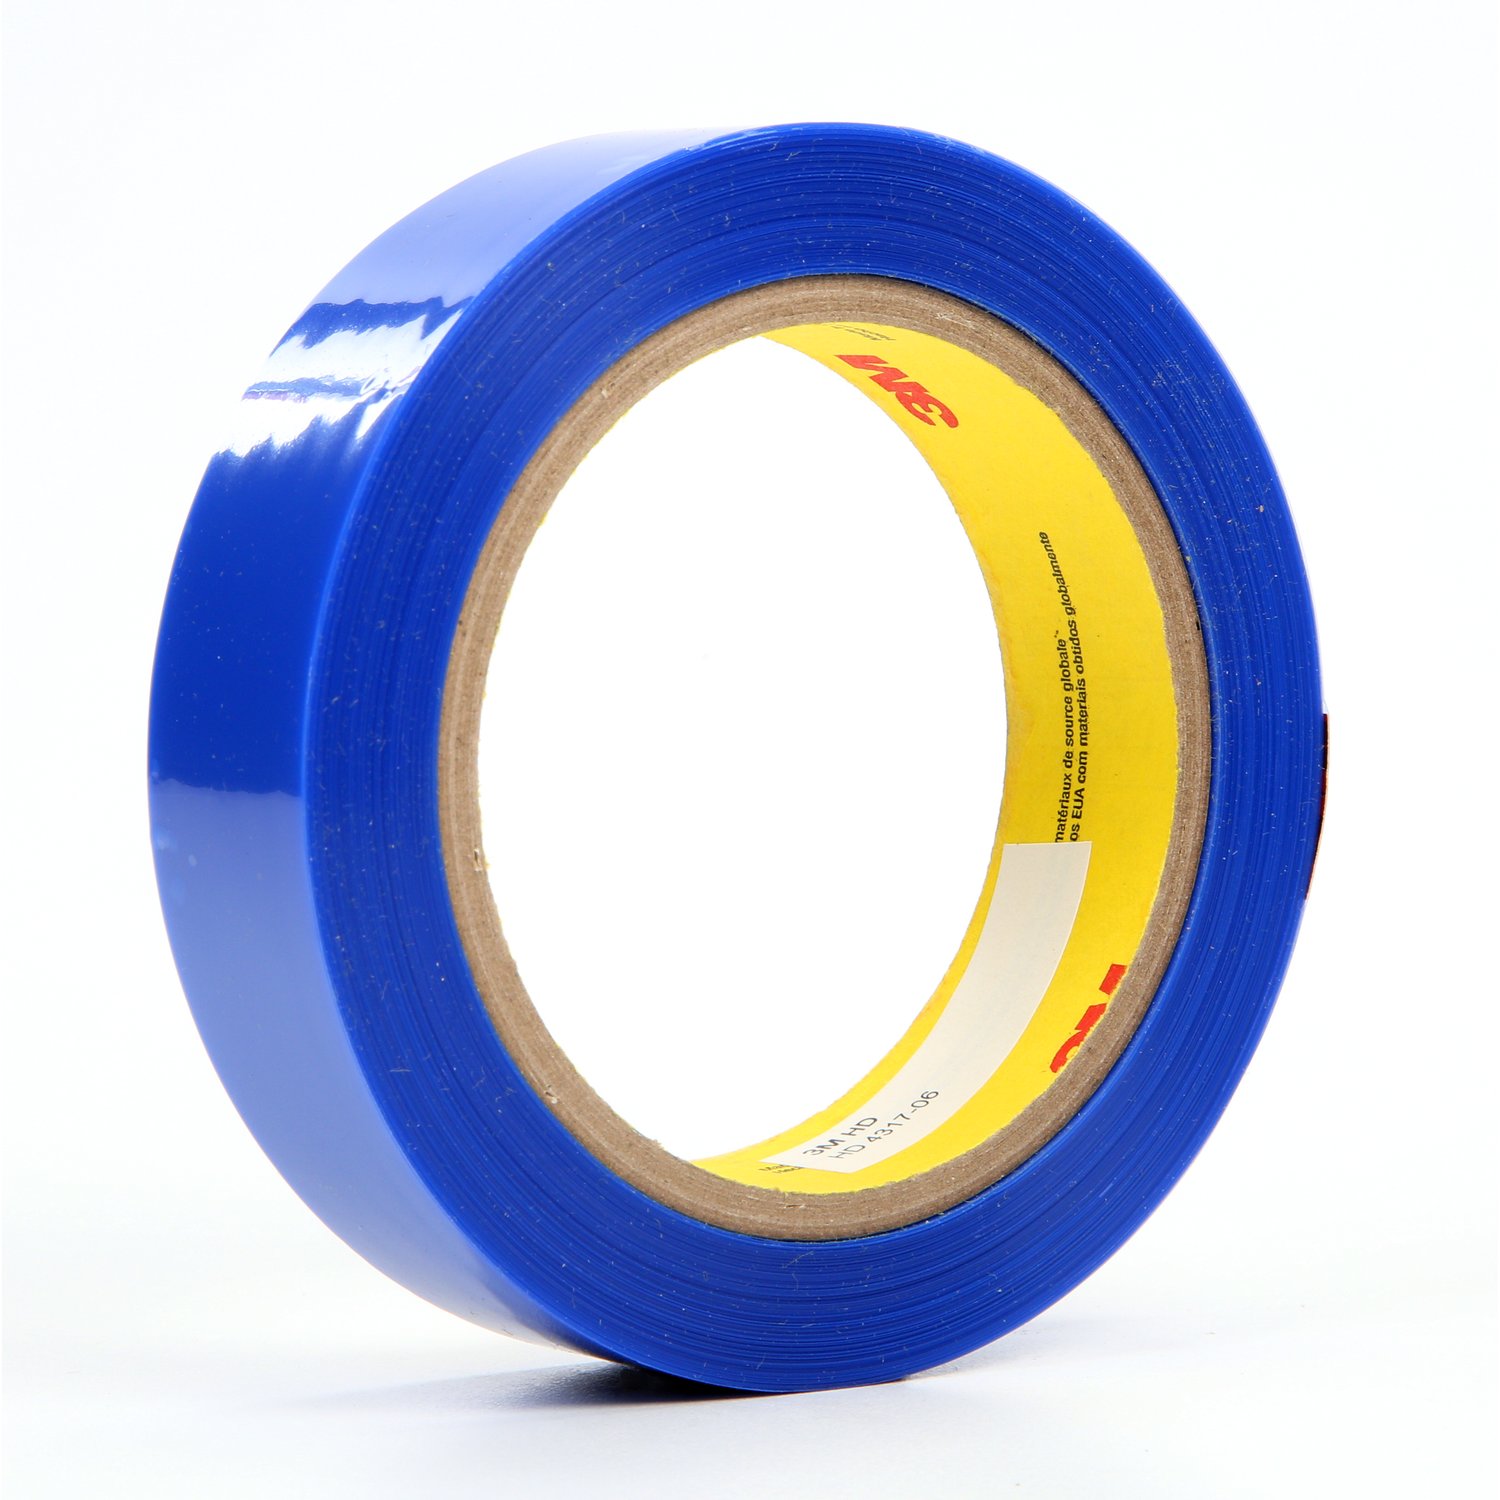 BT-123 Double Sided Polyester Splicing Tape